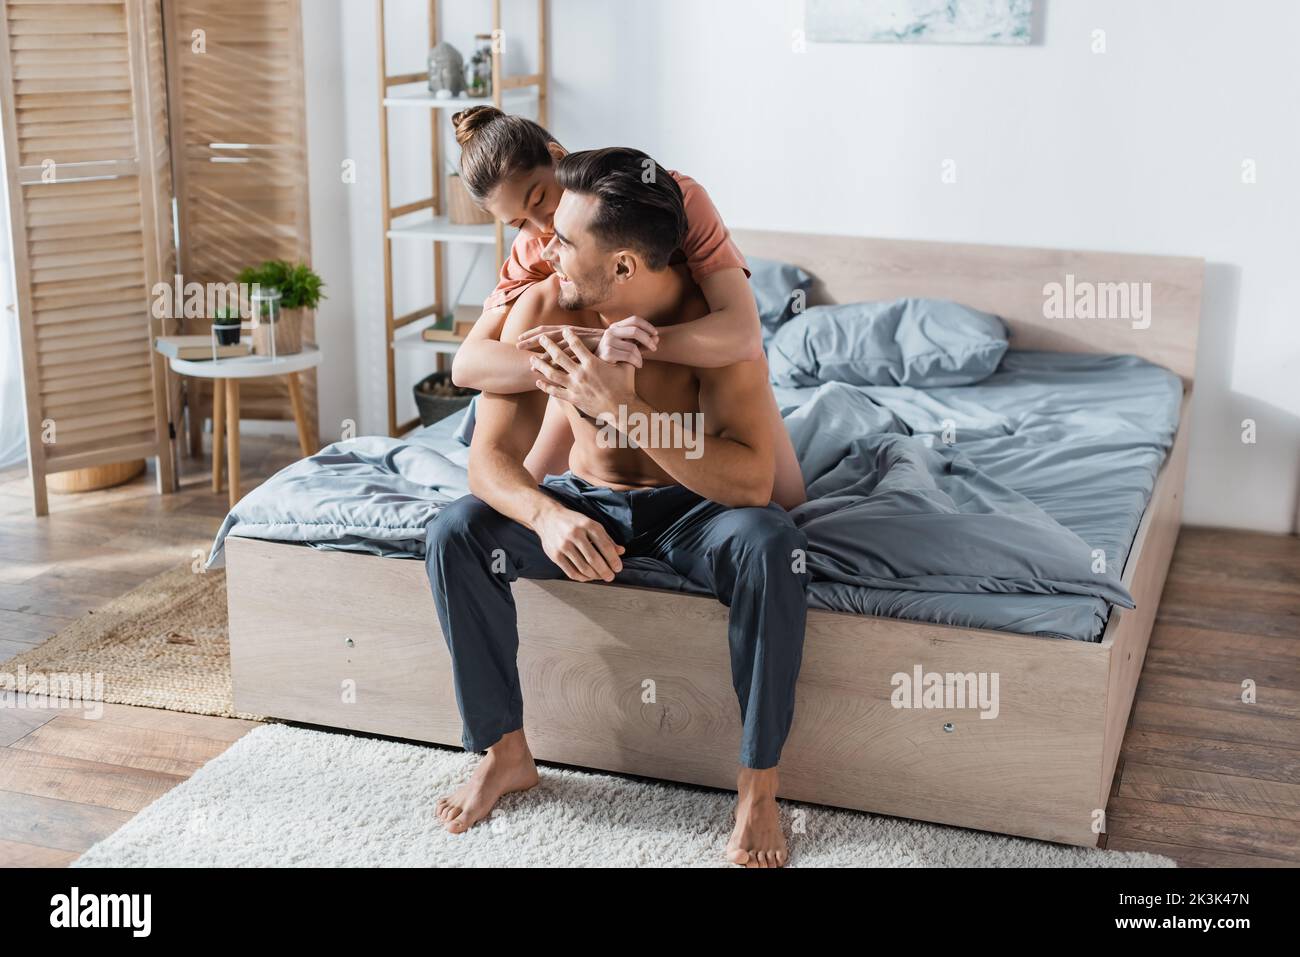 happy shirtless man sitting on bed in pajama pants near girlfriend embracing him in bedroom Stock Photo